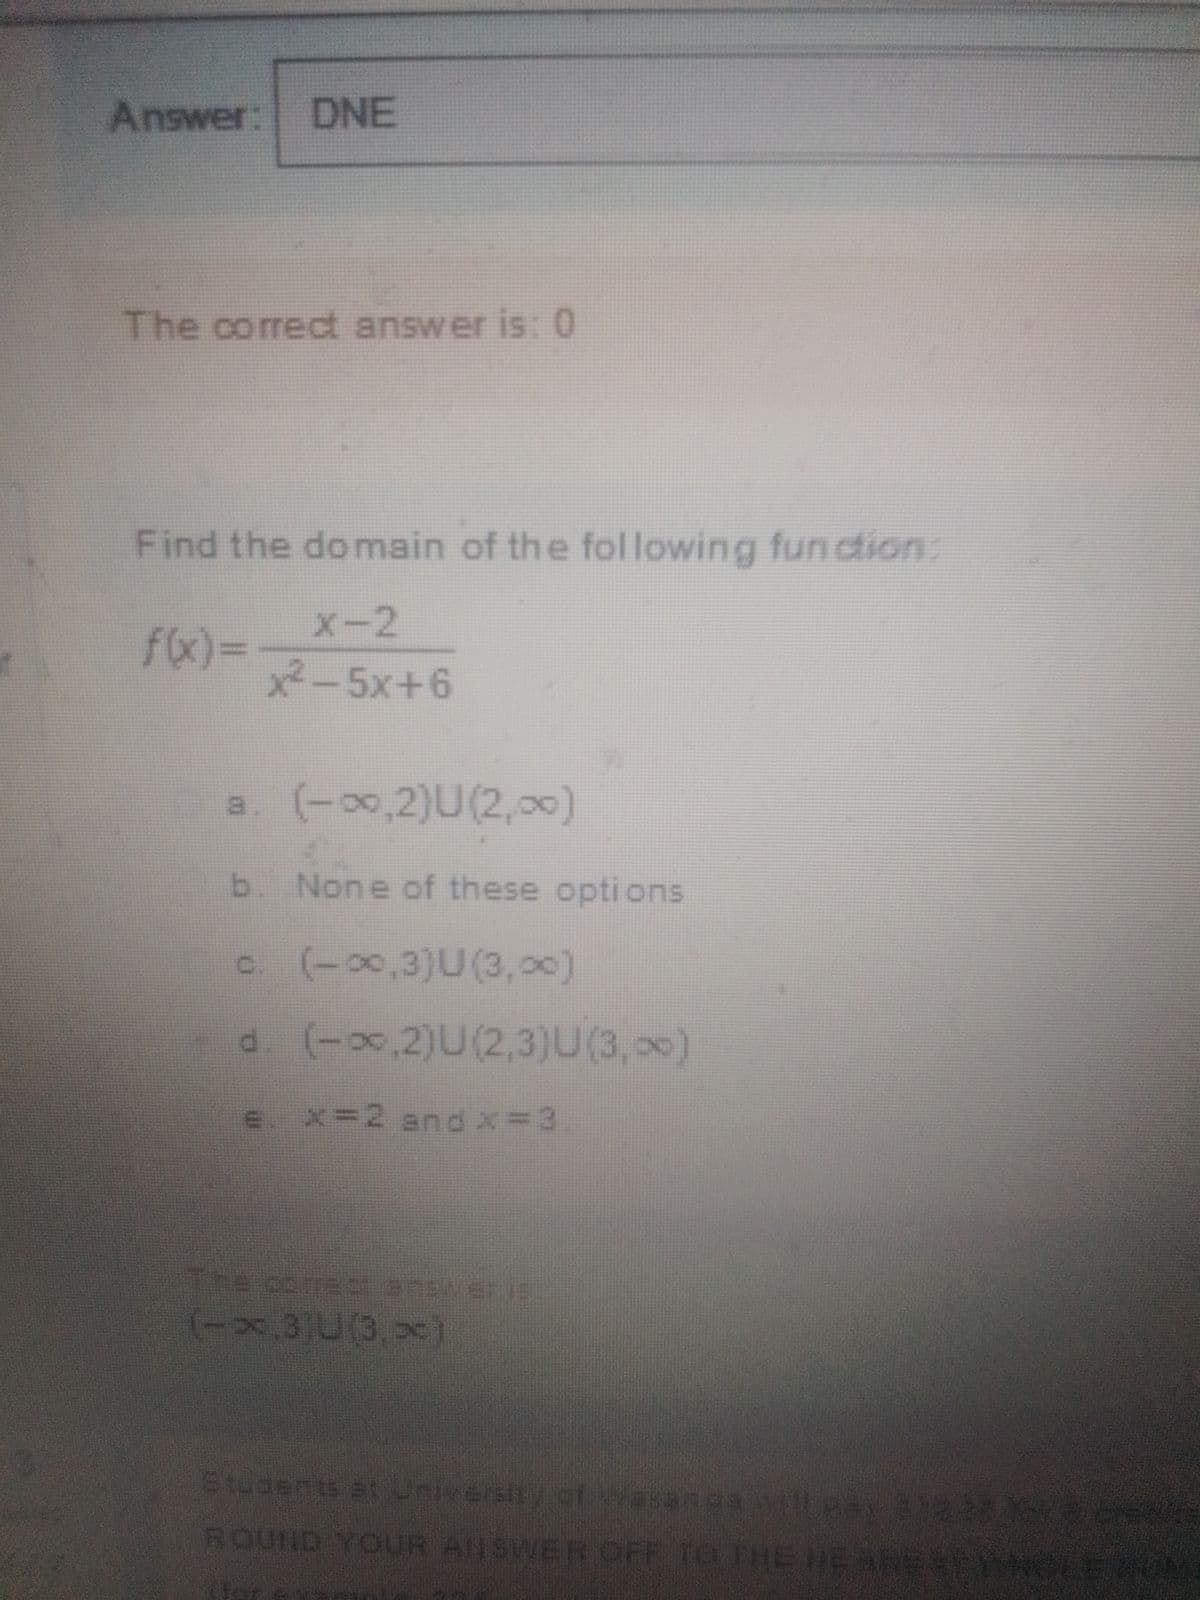 Answer: DNE
The correct answer is: 0
Find the domain of the fol lowing fun ction:
X-2
fx)3D
x2-5x+6
a. (-00,2)U(2, 0)
b. None of these options
c. (-0,3)U(3,00)
d. (-0,2)U(2,3)U(3,00)
e. x=2 and x= 3
The corec answer is
(-x,3)U(3,>c)
Studerts at iversity.of
f waranga wall pAY BIR ce
ROUND YOUR ANSWER OFF TO THE HE
EARESNLEM
